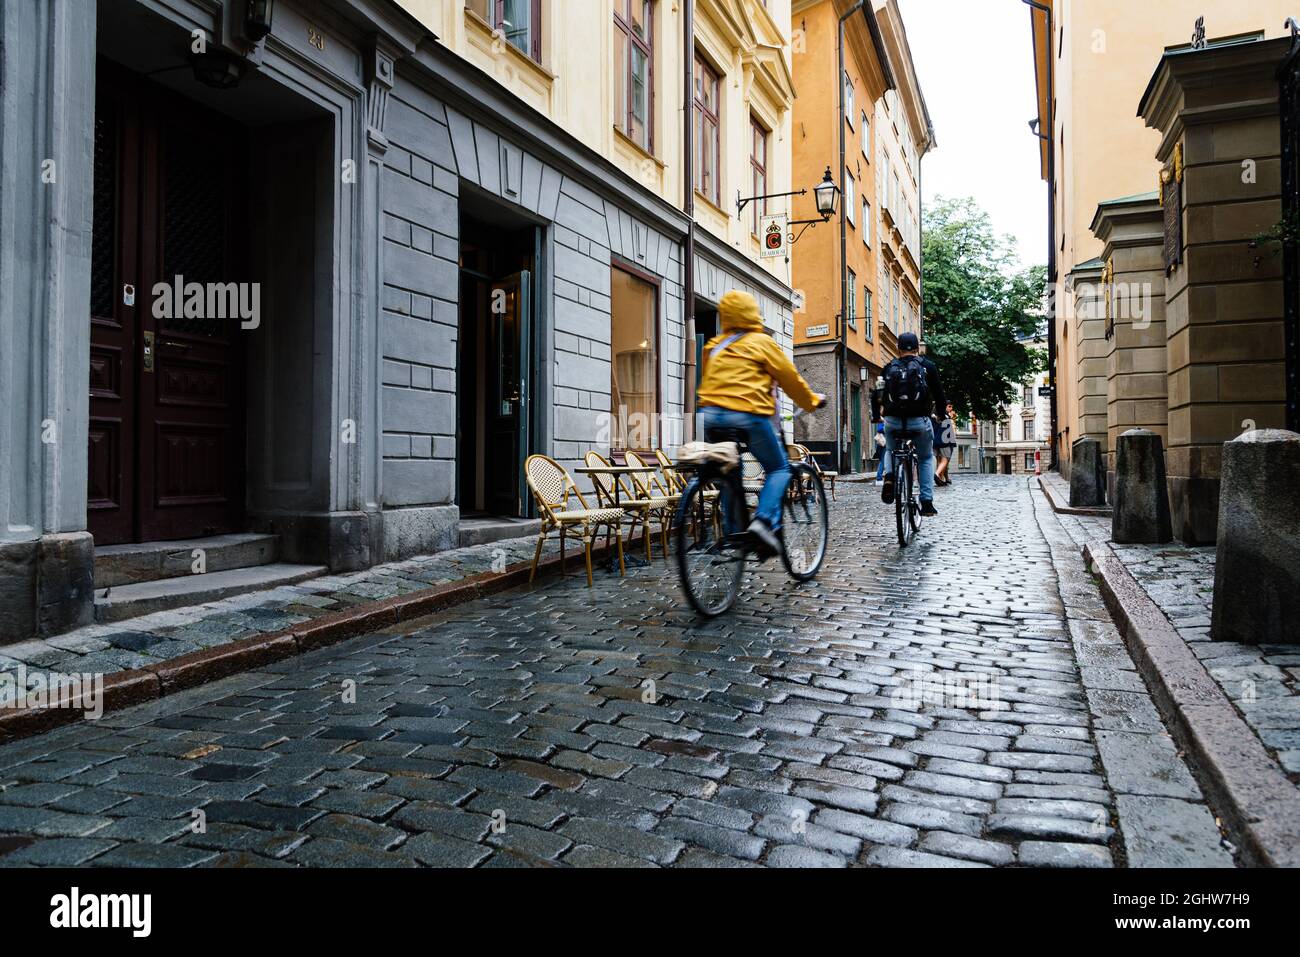 Stockholm, Sweden - August 8, 2019: Tourists riding bicycles in cobblestoned street in Gamla Stan. The Old Town is one of the largest and best preserv Stock Photo